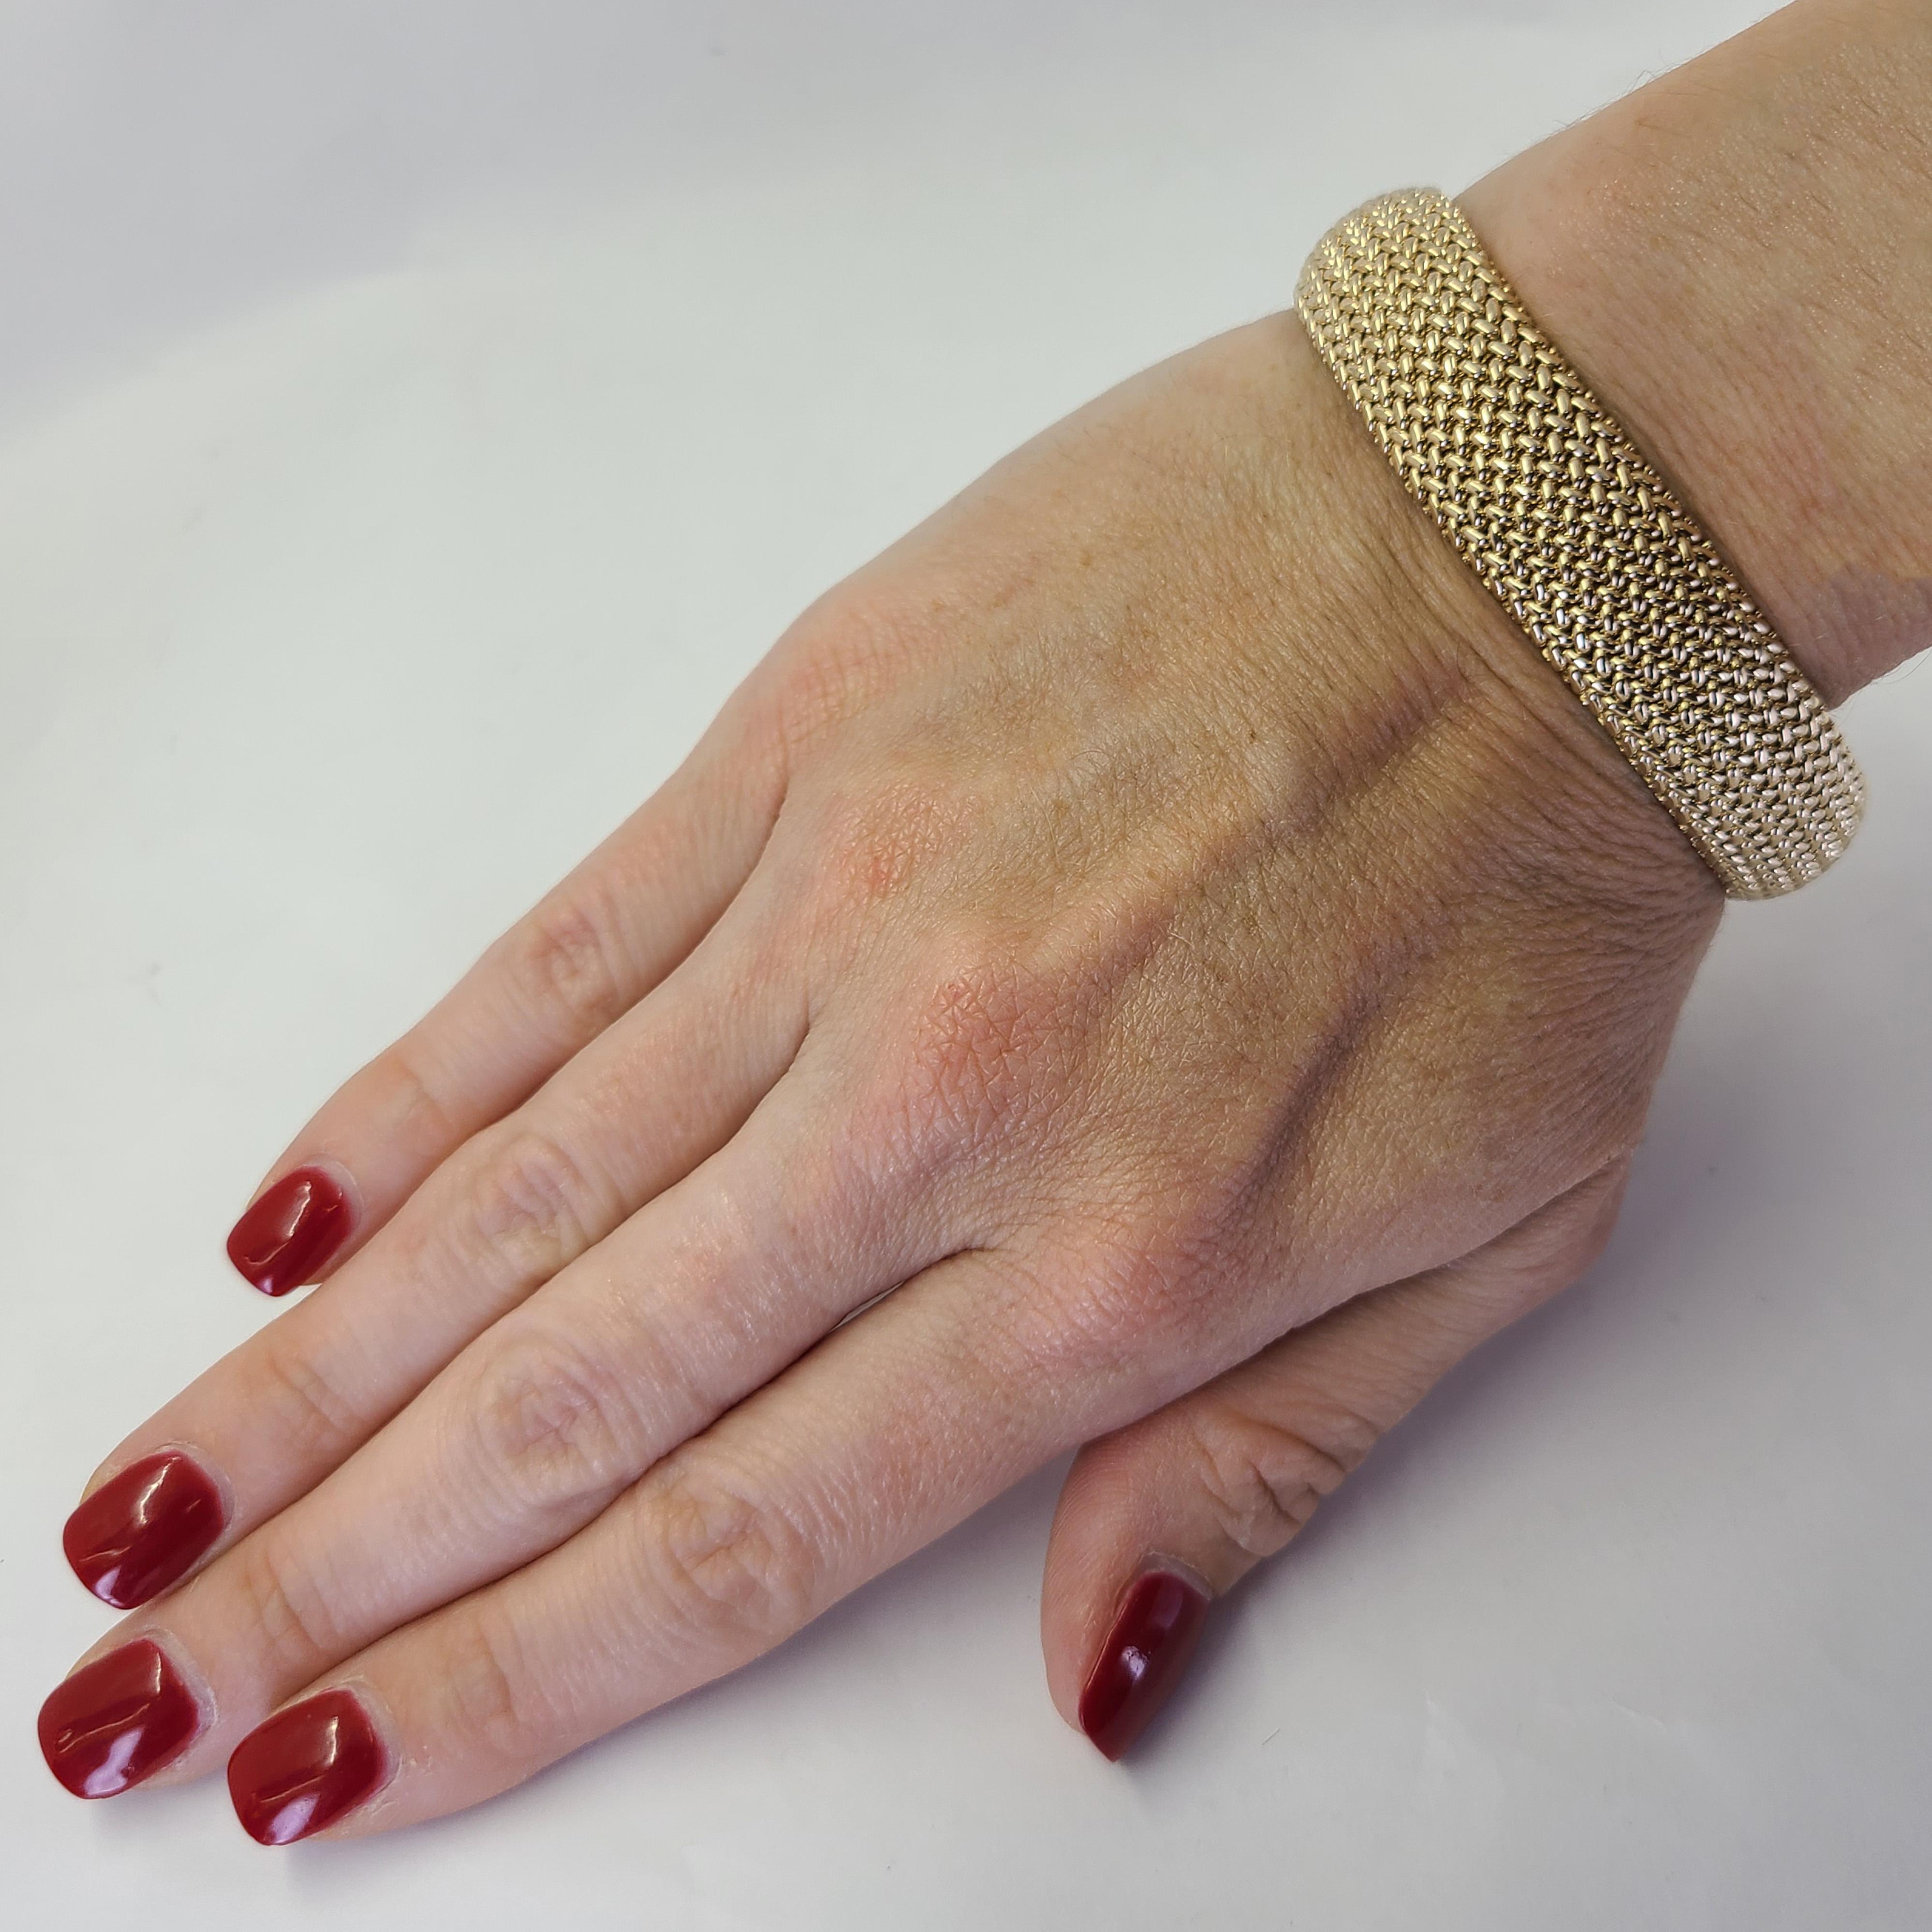 14 Karat Yellow Gold 15mm Wide Woven Mesh Bracelet with Slight Dome Shape. 7.5 Inches Long. Box Clasp with Figure 8 Safety. Finished Weight is 43.6 Grams.